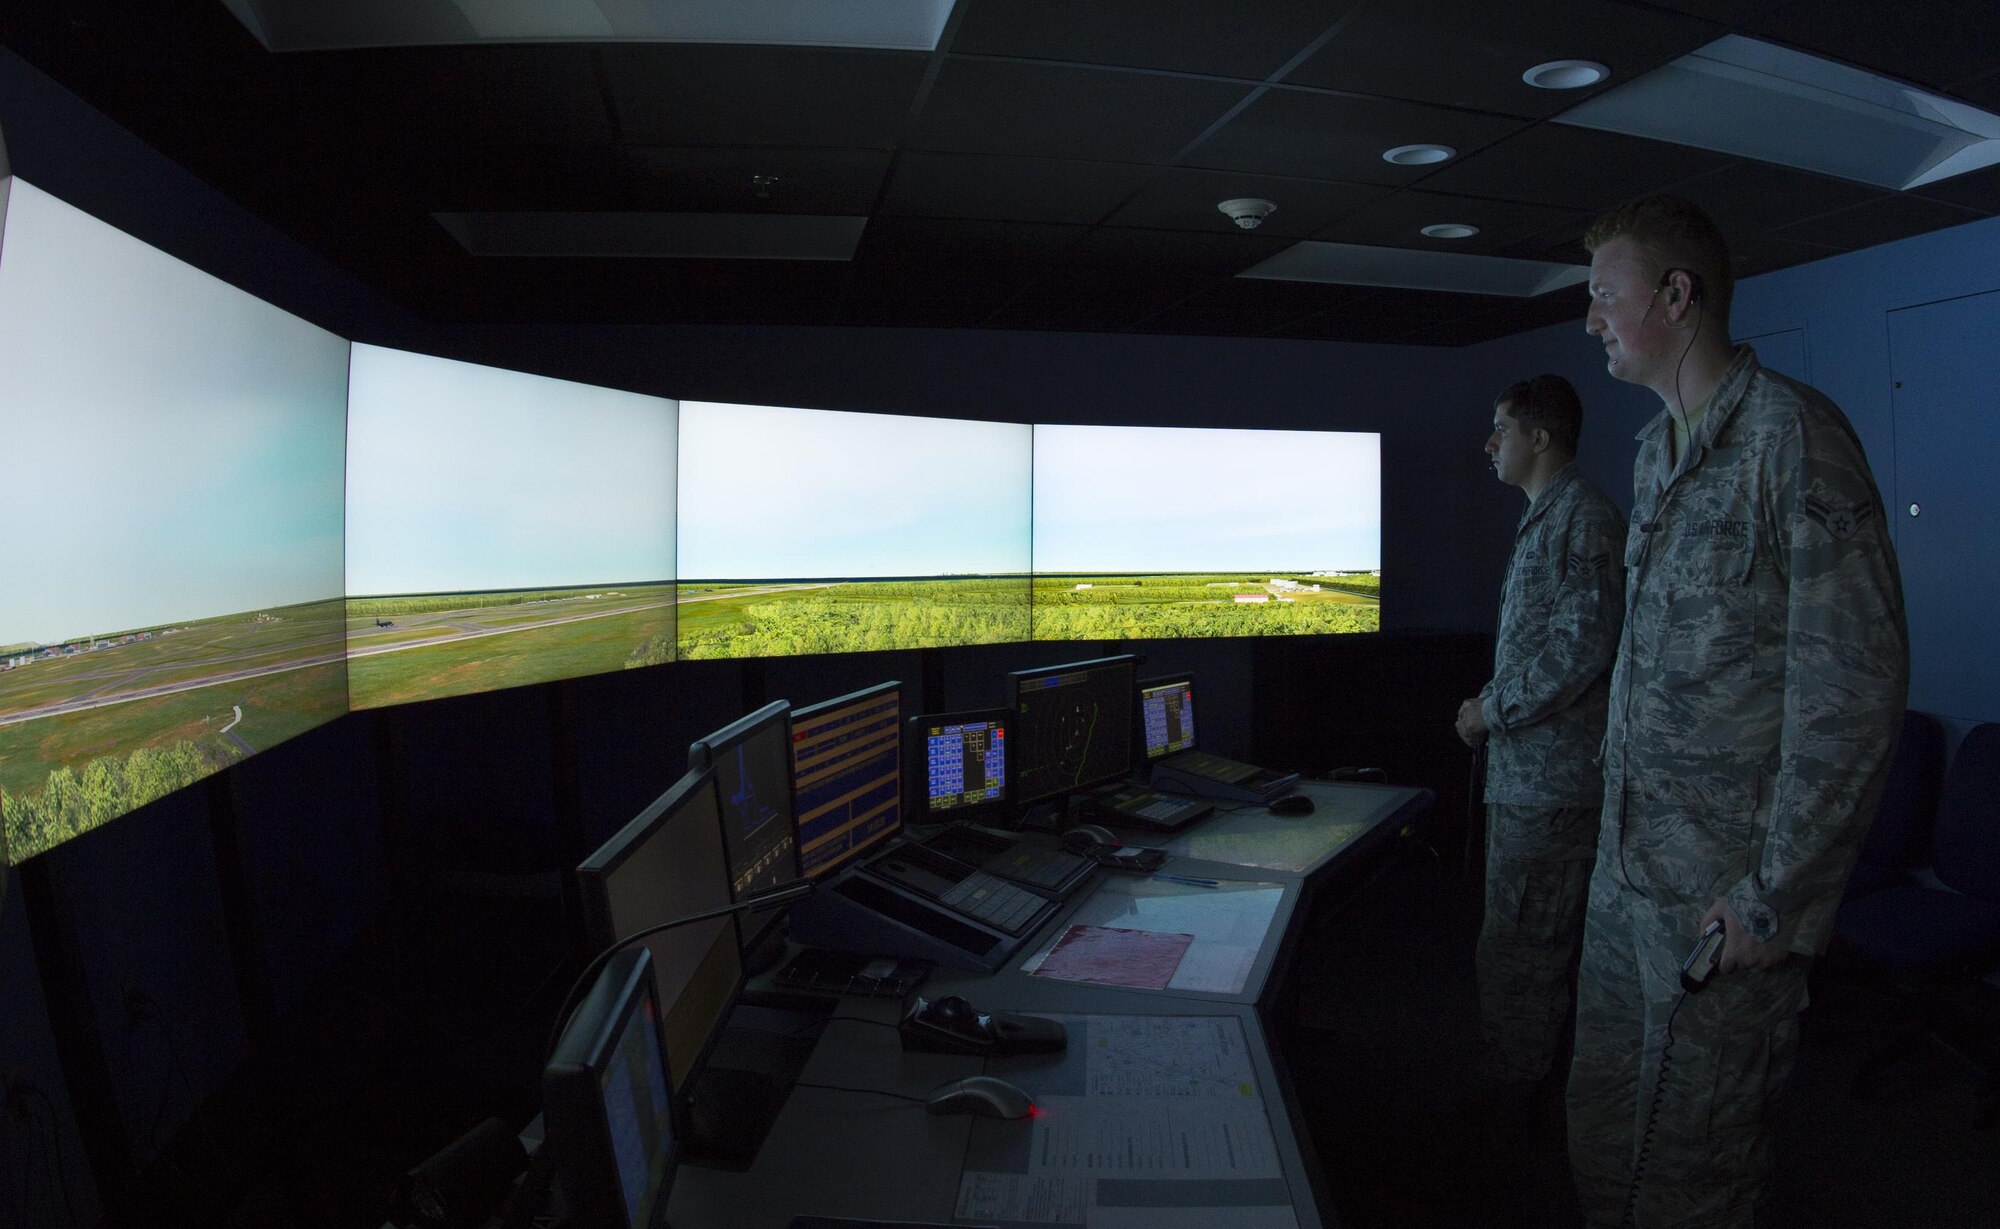 U.S. Air Force Senior Airman Vincent Magenti, an air traffic controller, and Airman 1st Class Tyler Abell, an air traffic controllers assigned to the 6th Operations Support Squadron, focus on a simulated air field during an air traffic control simulator scenario at MacDill Air Force Base, Fla., Oct. 27, 2017. The simulator is a tool used by Airmen to train and demonstrate proficiency in numerous situations, prior to working in the field. (U.S. Air Force photo by Senior Airman Mariette Adams)